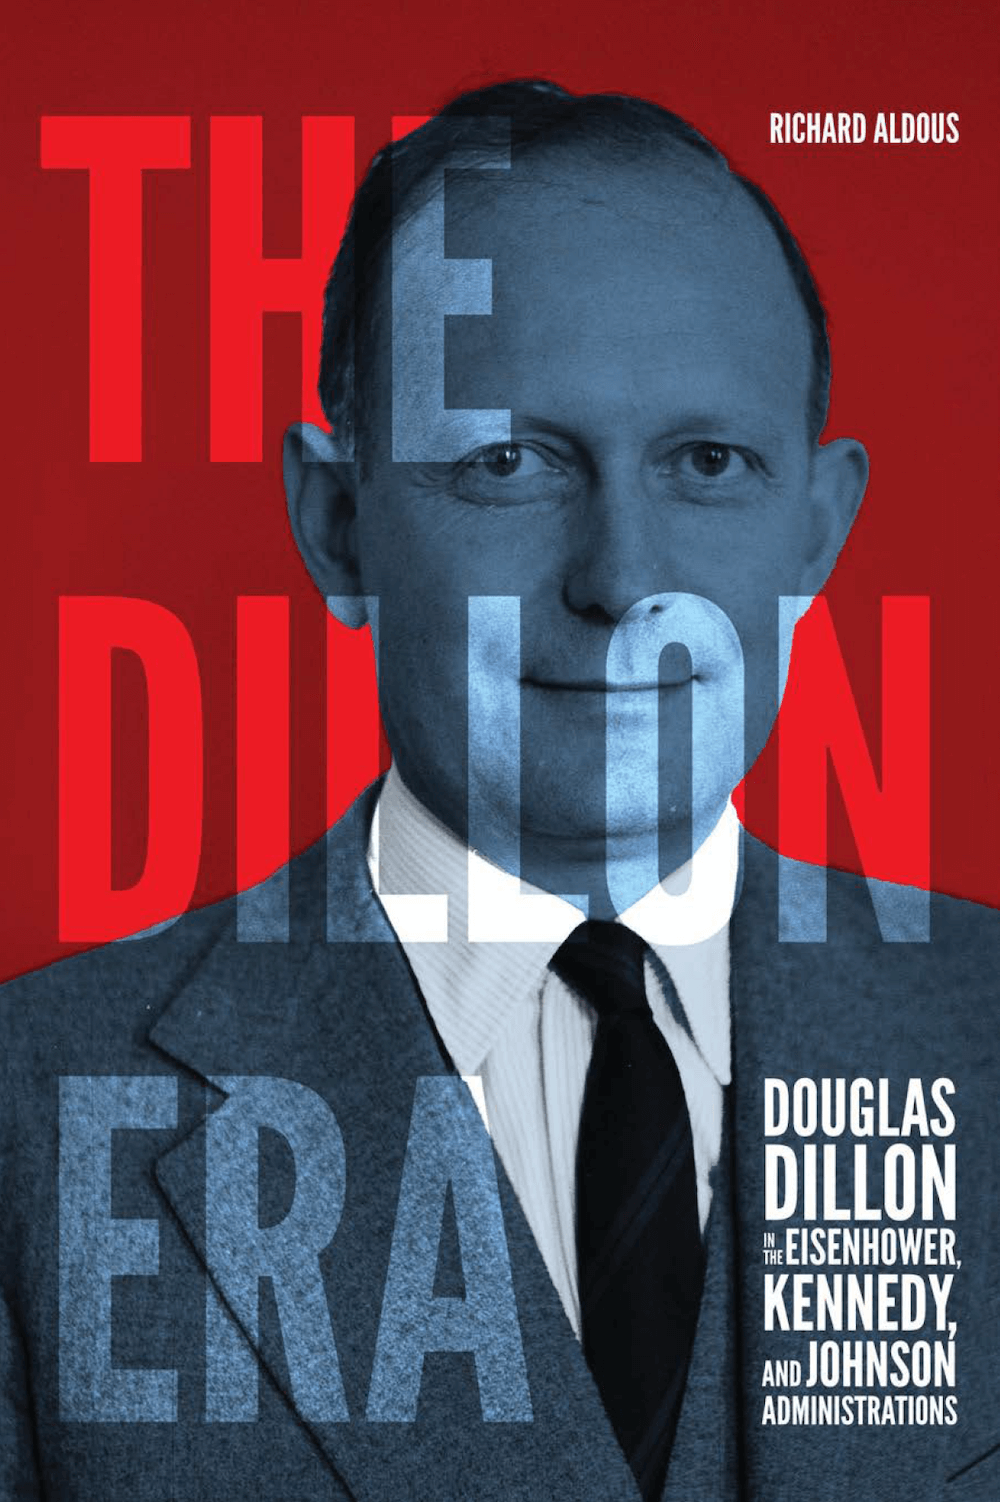 Richard Aldous’ masterful biography of Douglass Dillon will be released in October 2023.